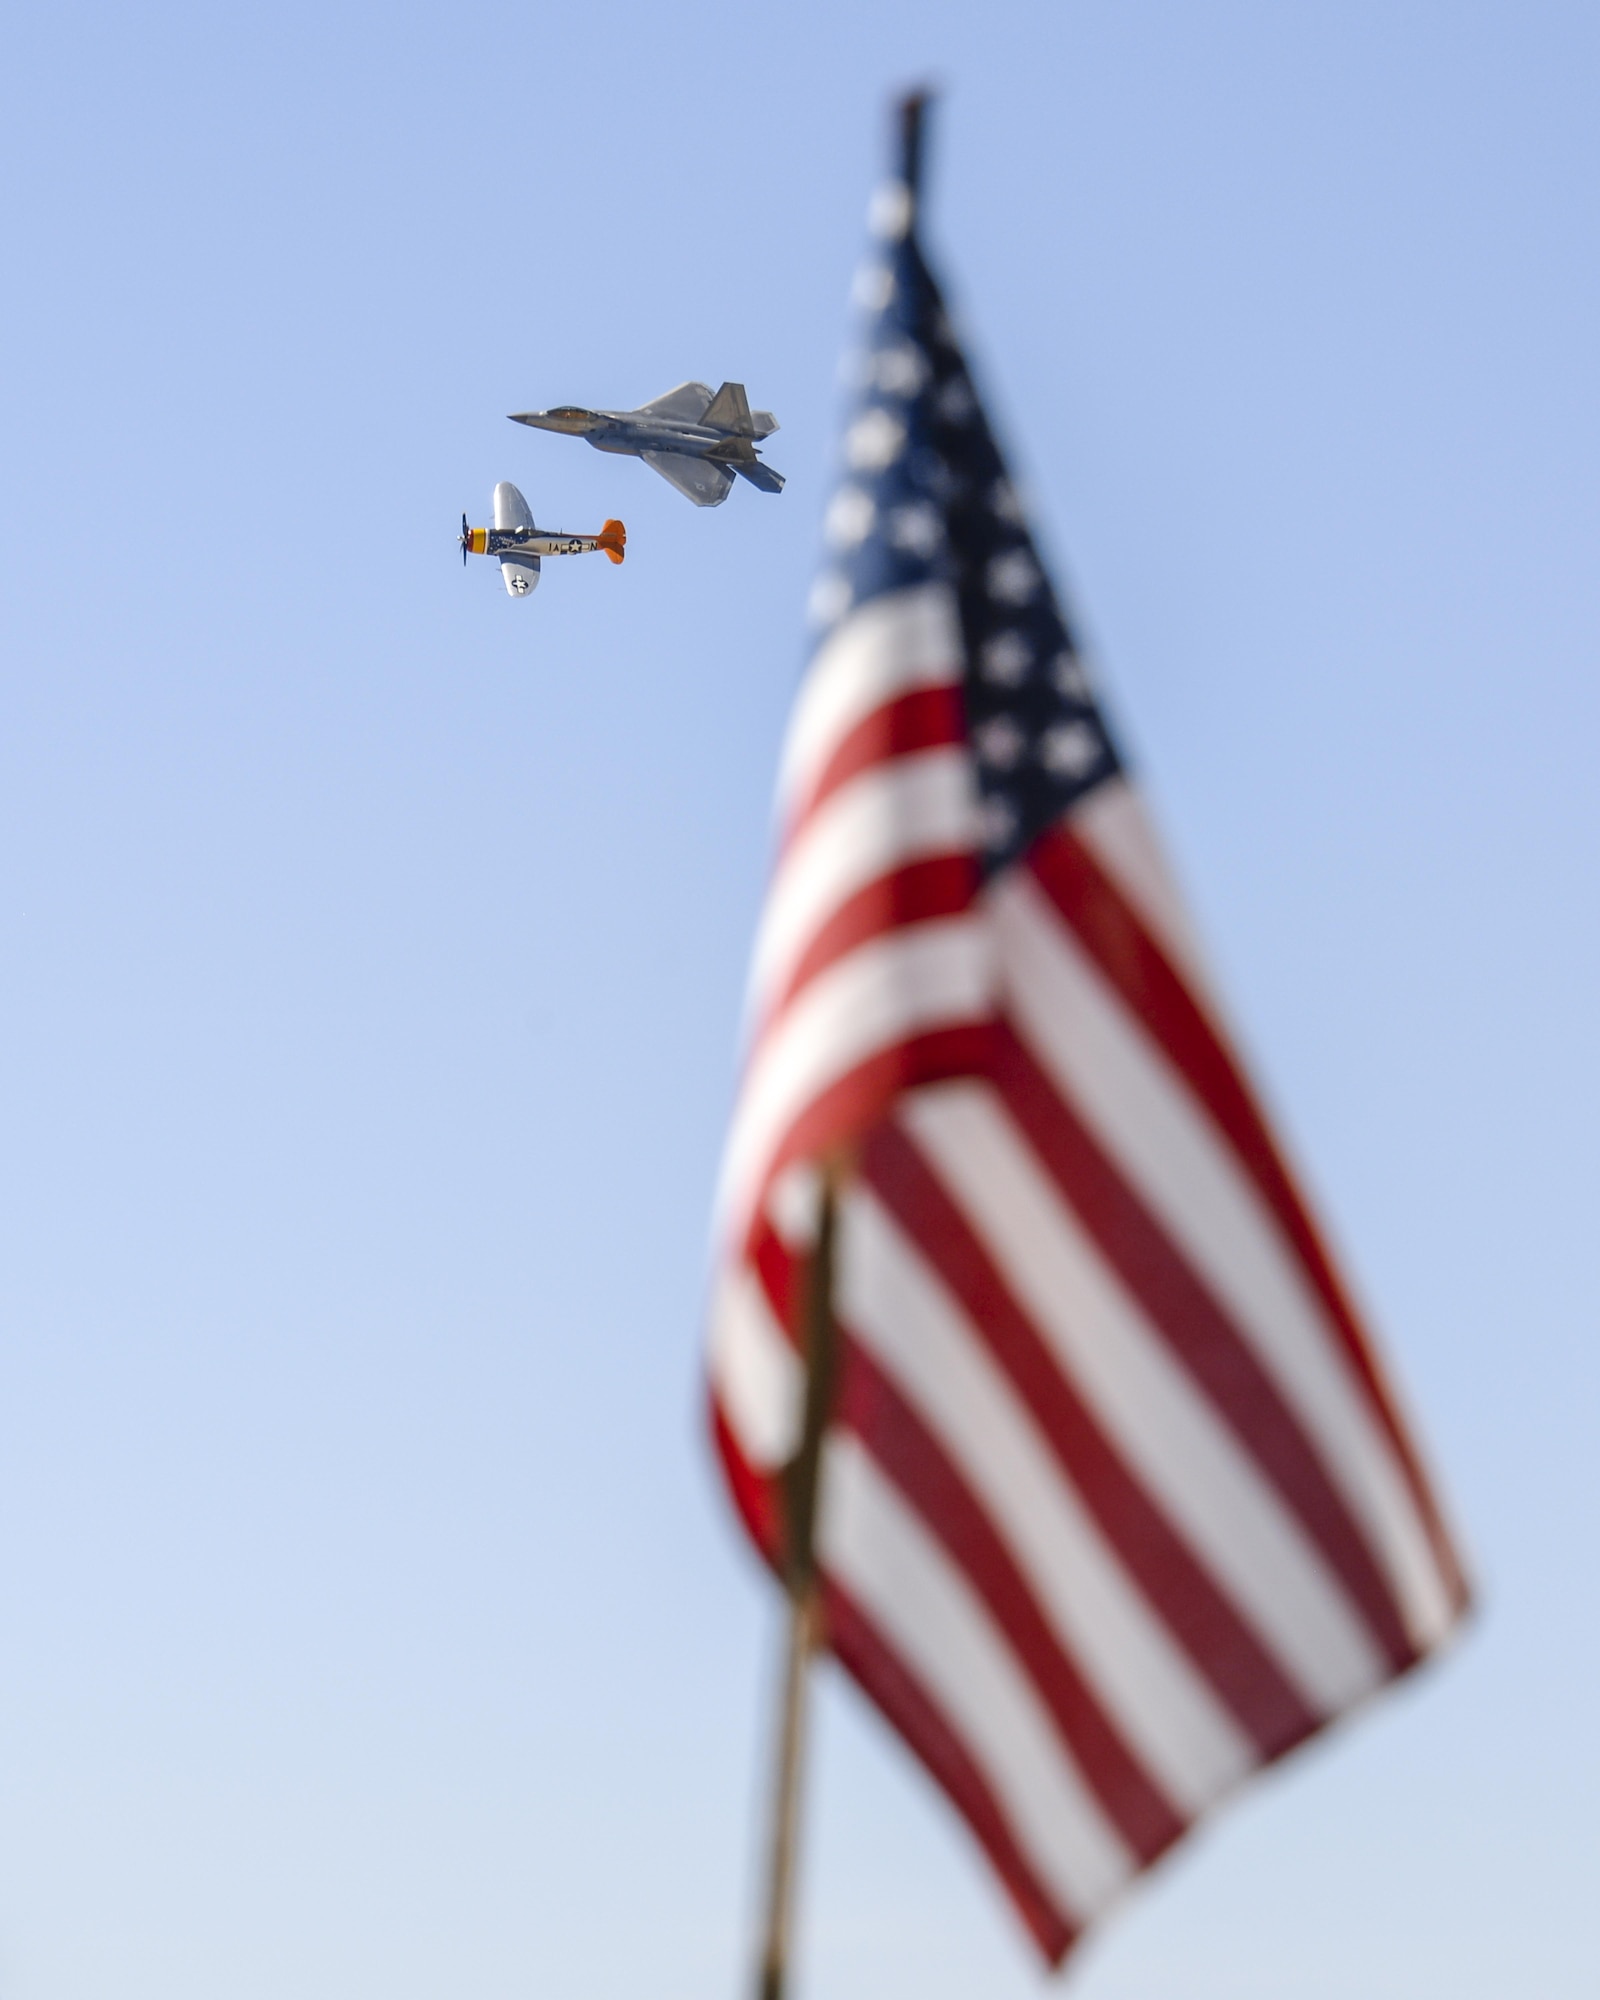 A U.S. Air Force F-22 Raptor and a P-51 Mustang fly in formation during the 2016 Heritage Flight Training and Certification Course at Davis-Monthan Air Force Base, Ariz., March 4, 2016. Established in 1997, the HFTCC certifies civilian pilots of historic military aircraft and U.S. Air Force pilots to fly in formation together during the upcoming air show season. (U.S. Air Force photo by Senior Airman Chris Massey/Released)